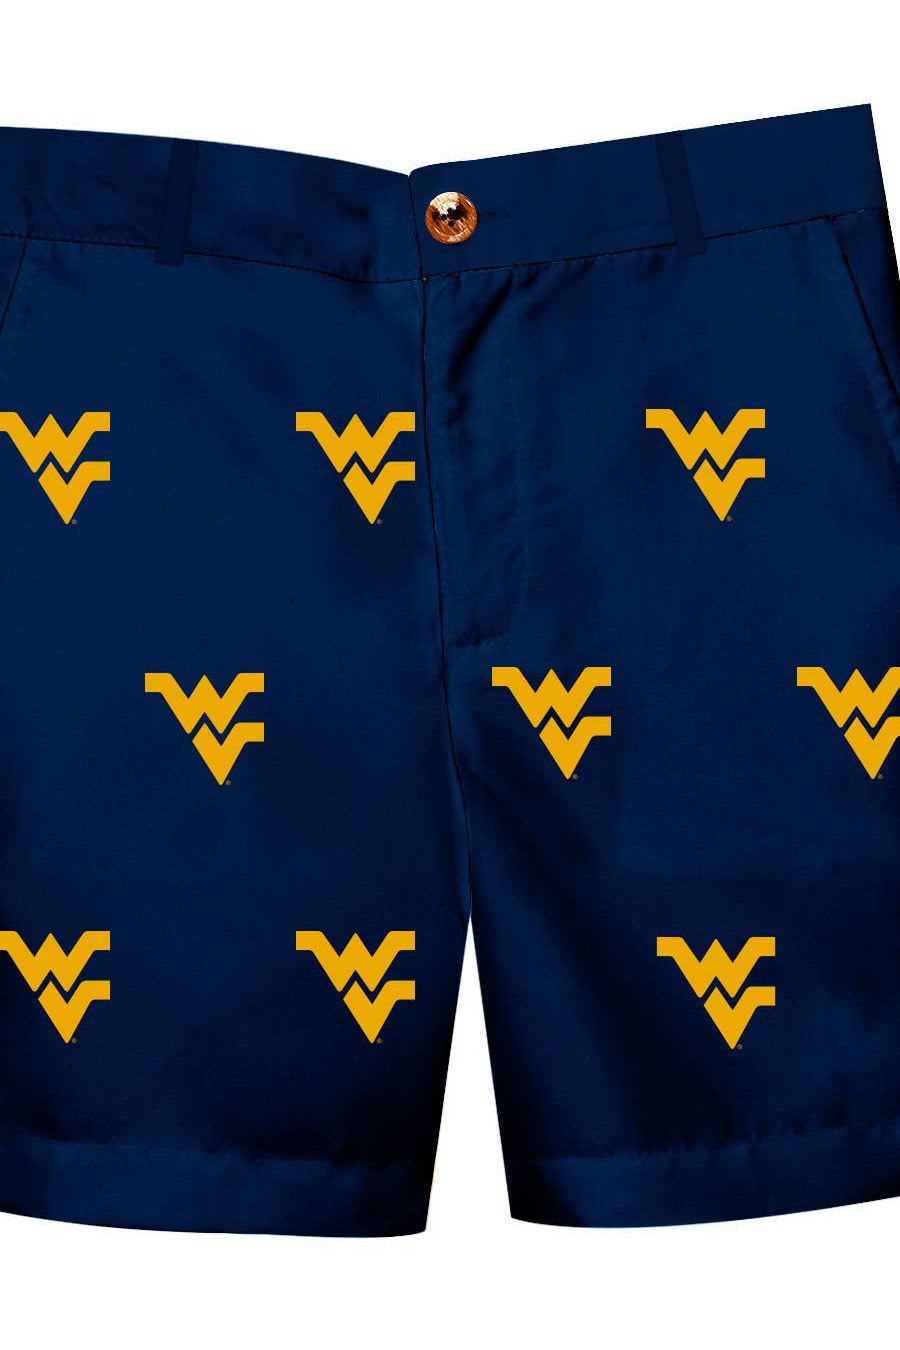 WV STRUCTURED SHORTS